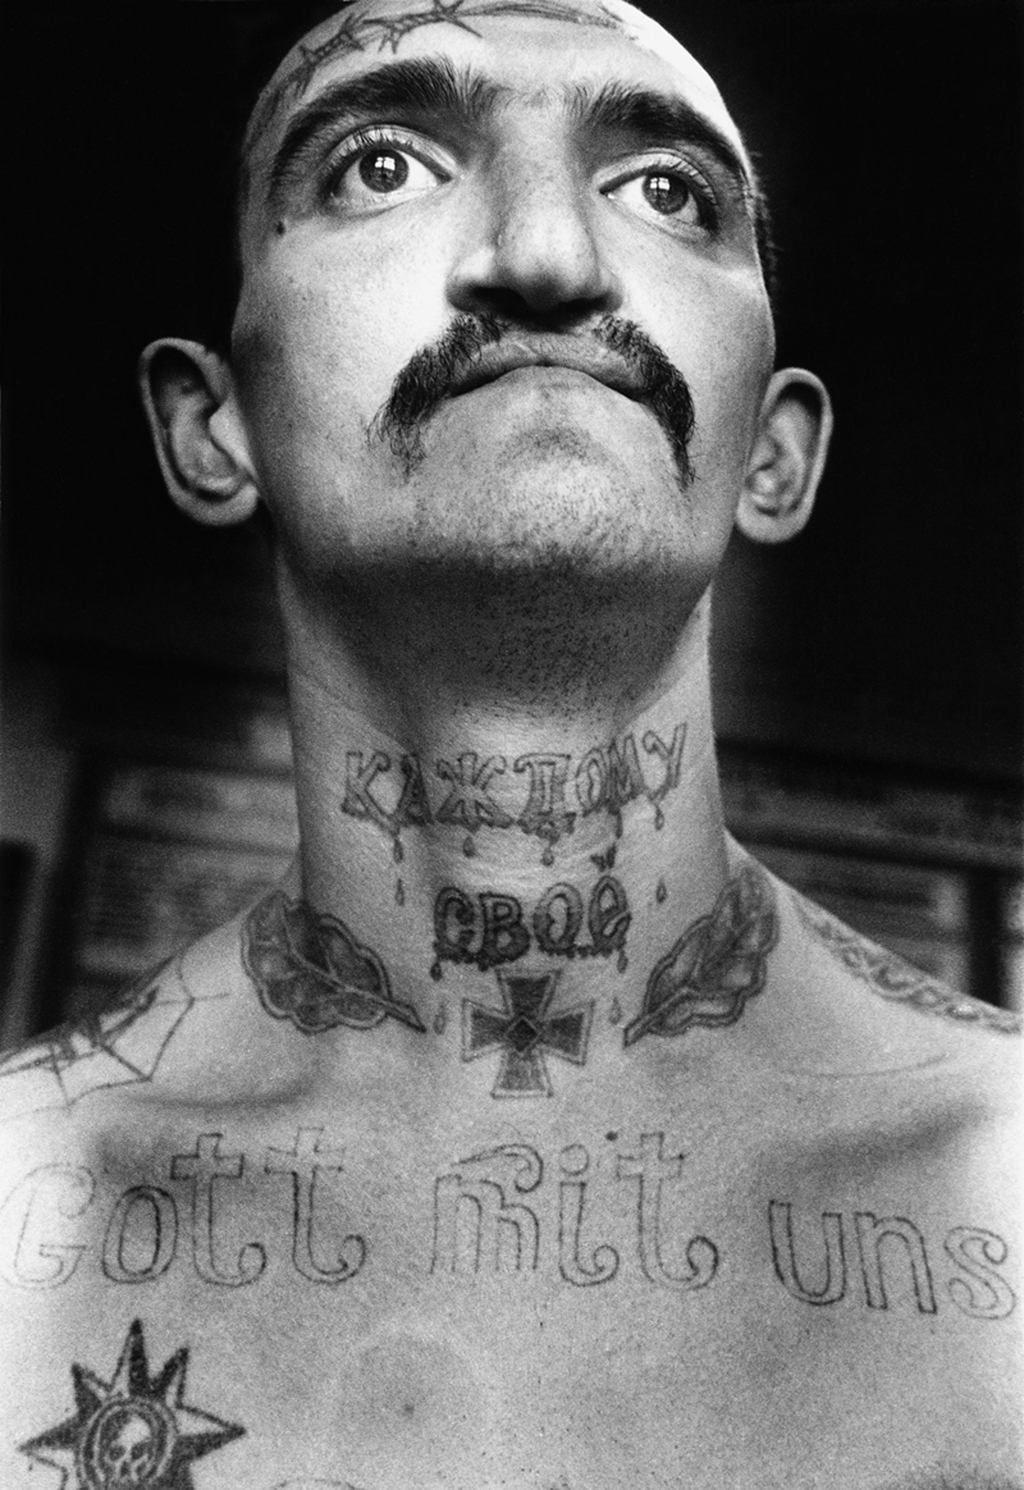 This inmate was convicted for drug related crimes. 'Gott mit uns': 'God with us' was a rallying cry of both the Russian empire and the Third Reich. The Nazi Iron Cross expresses ‘I don’t care about anybody’. This symbol of aggression and insubordination is often tattooed on the chest tattooed as if hung on a chain. The barbed wore on the forehead denotes that the bearer ‘will never be corrected’.